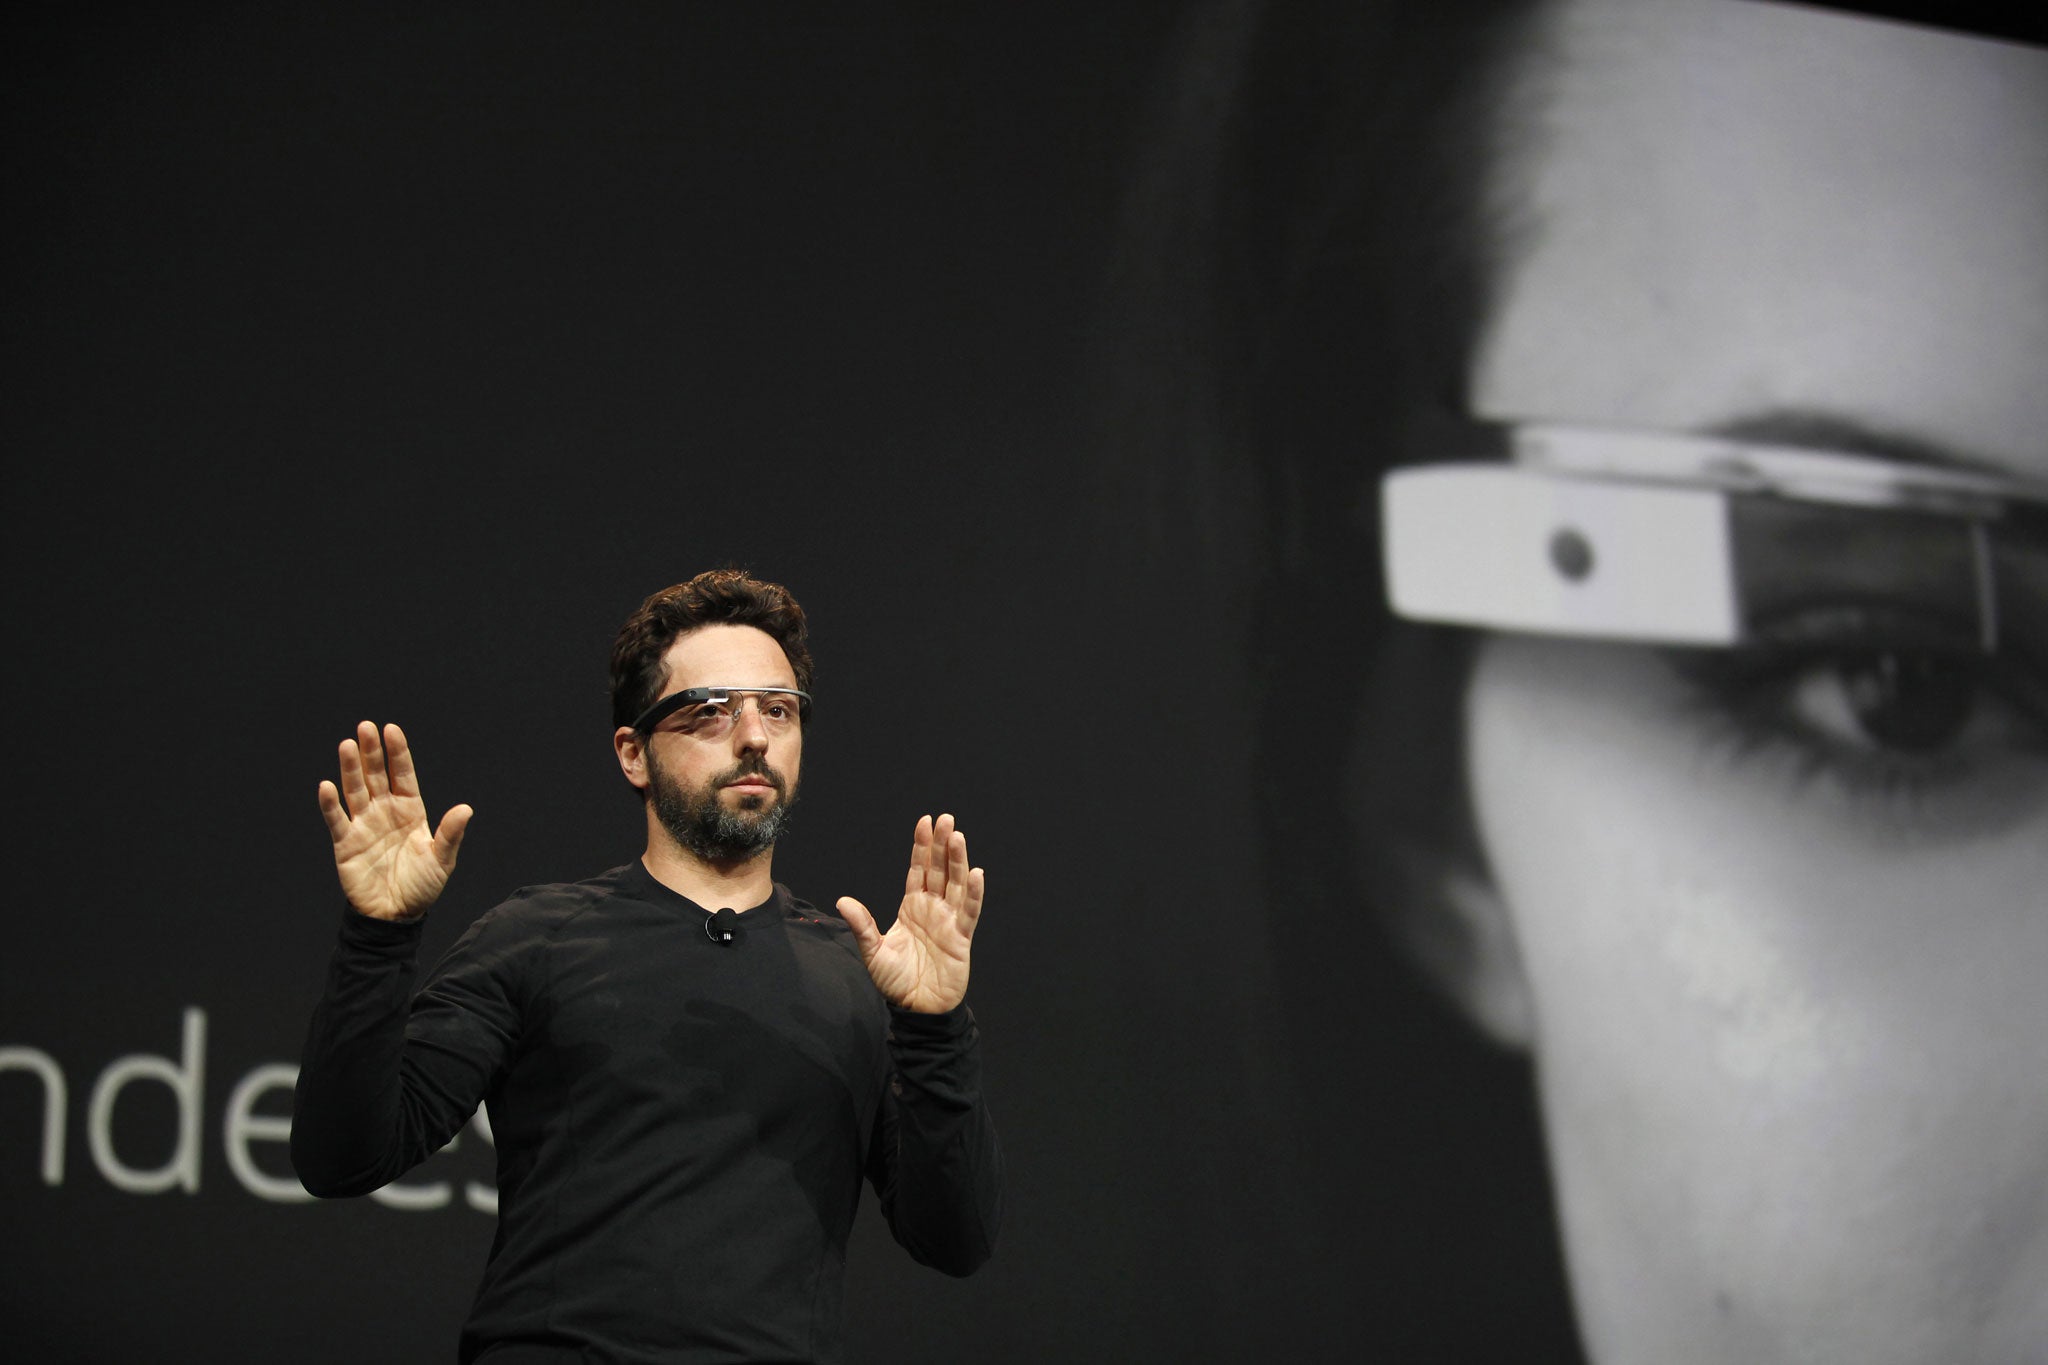 Sergey Brin, CEO and co-founder of Google, wears a Google Glass during a product demonstration during Google I/O 2012.